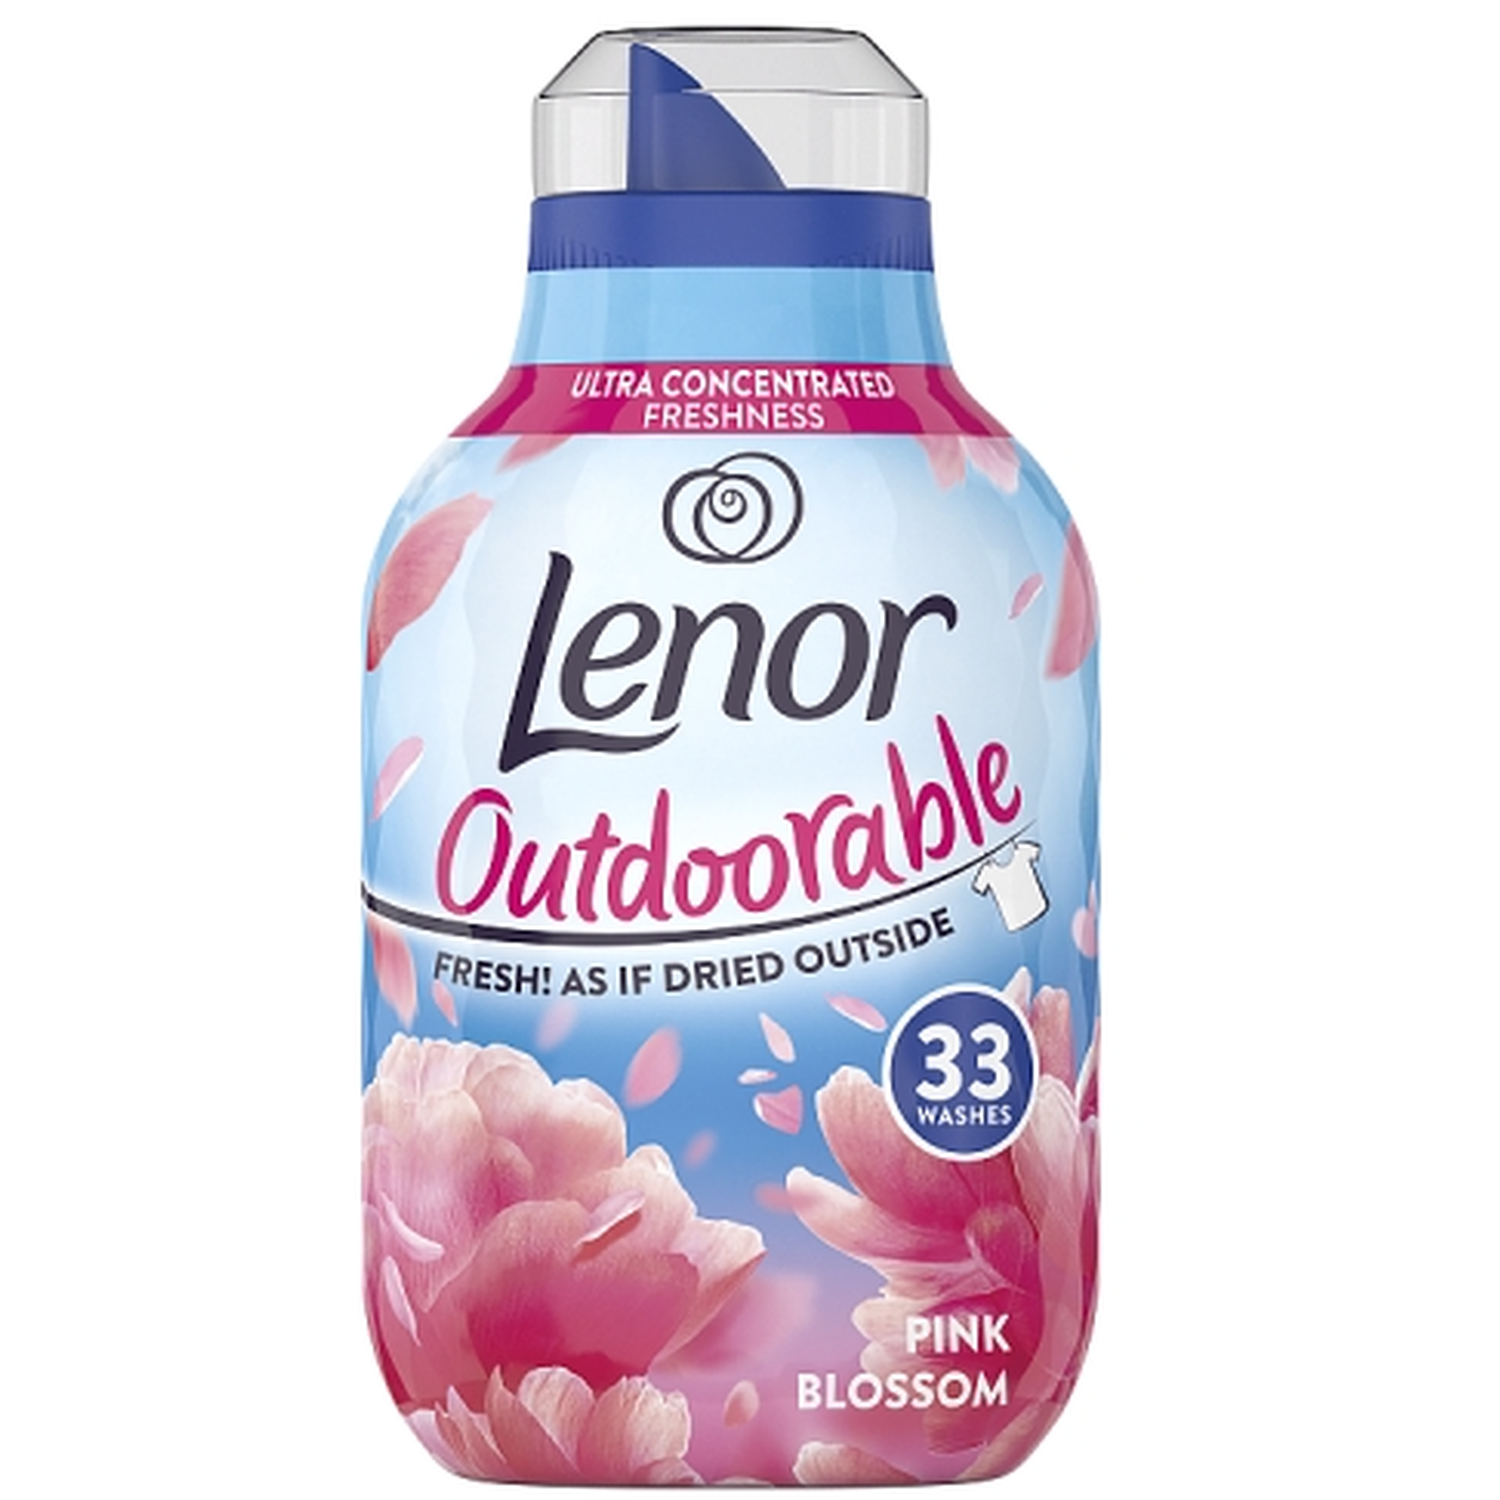 Lenor Pink Blossom Outdoorable Fabric Conditioner 33 Washes Image